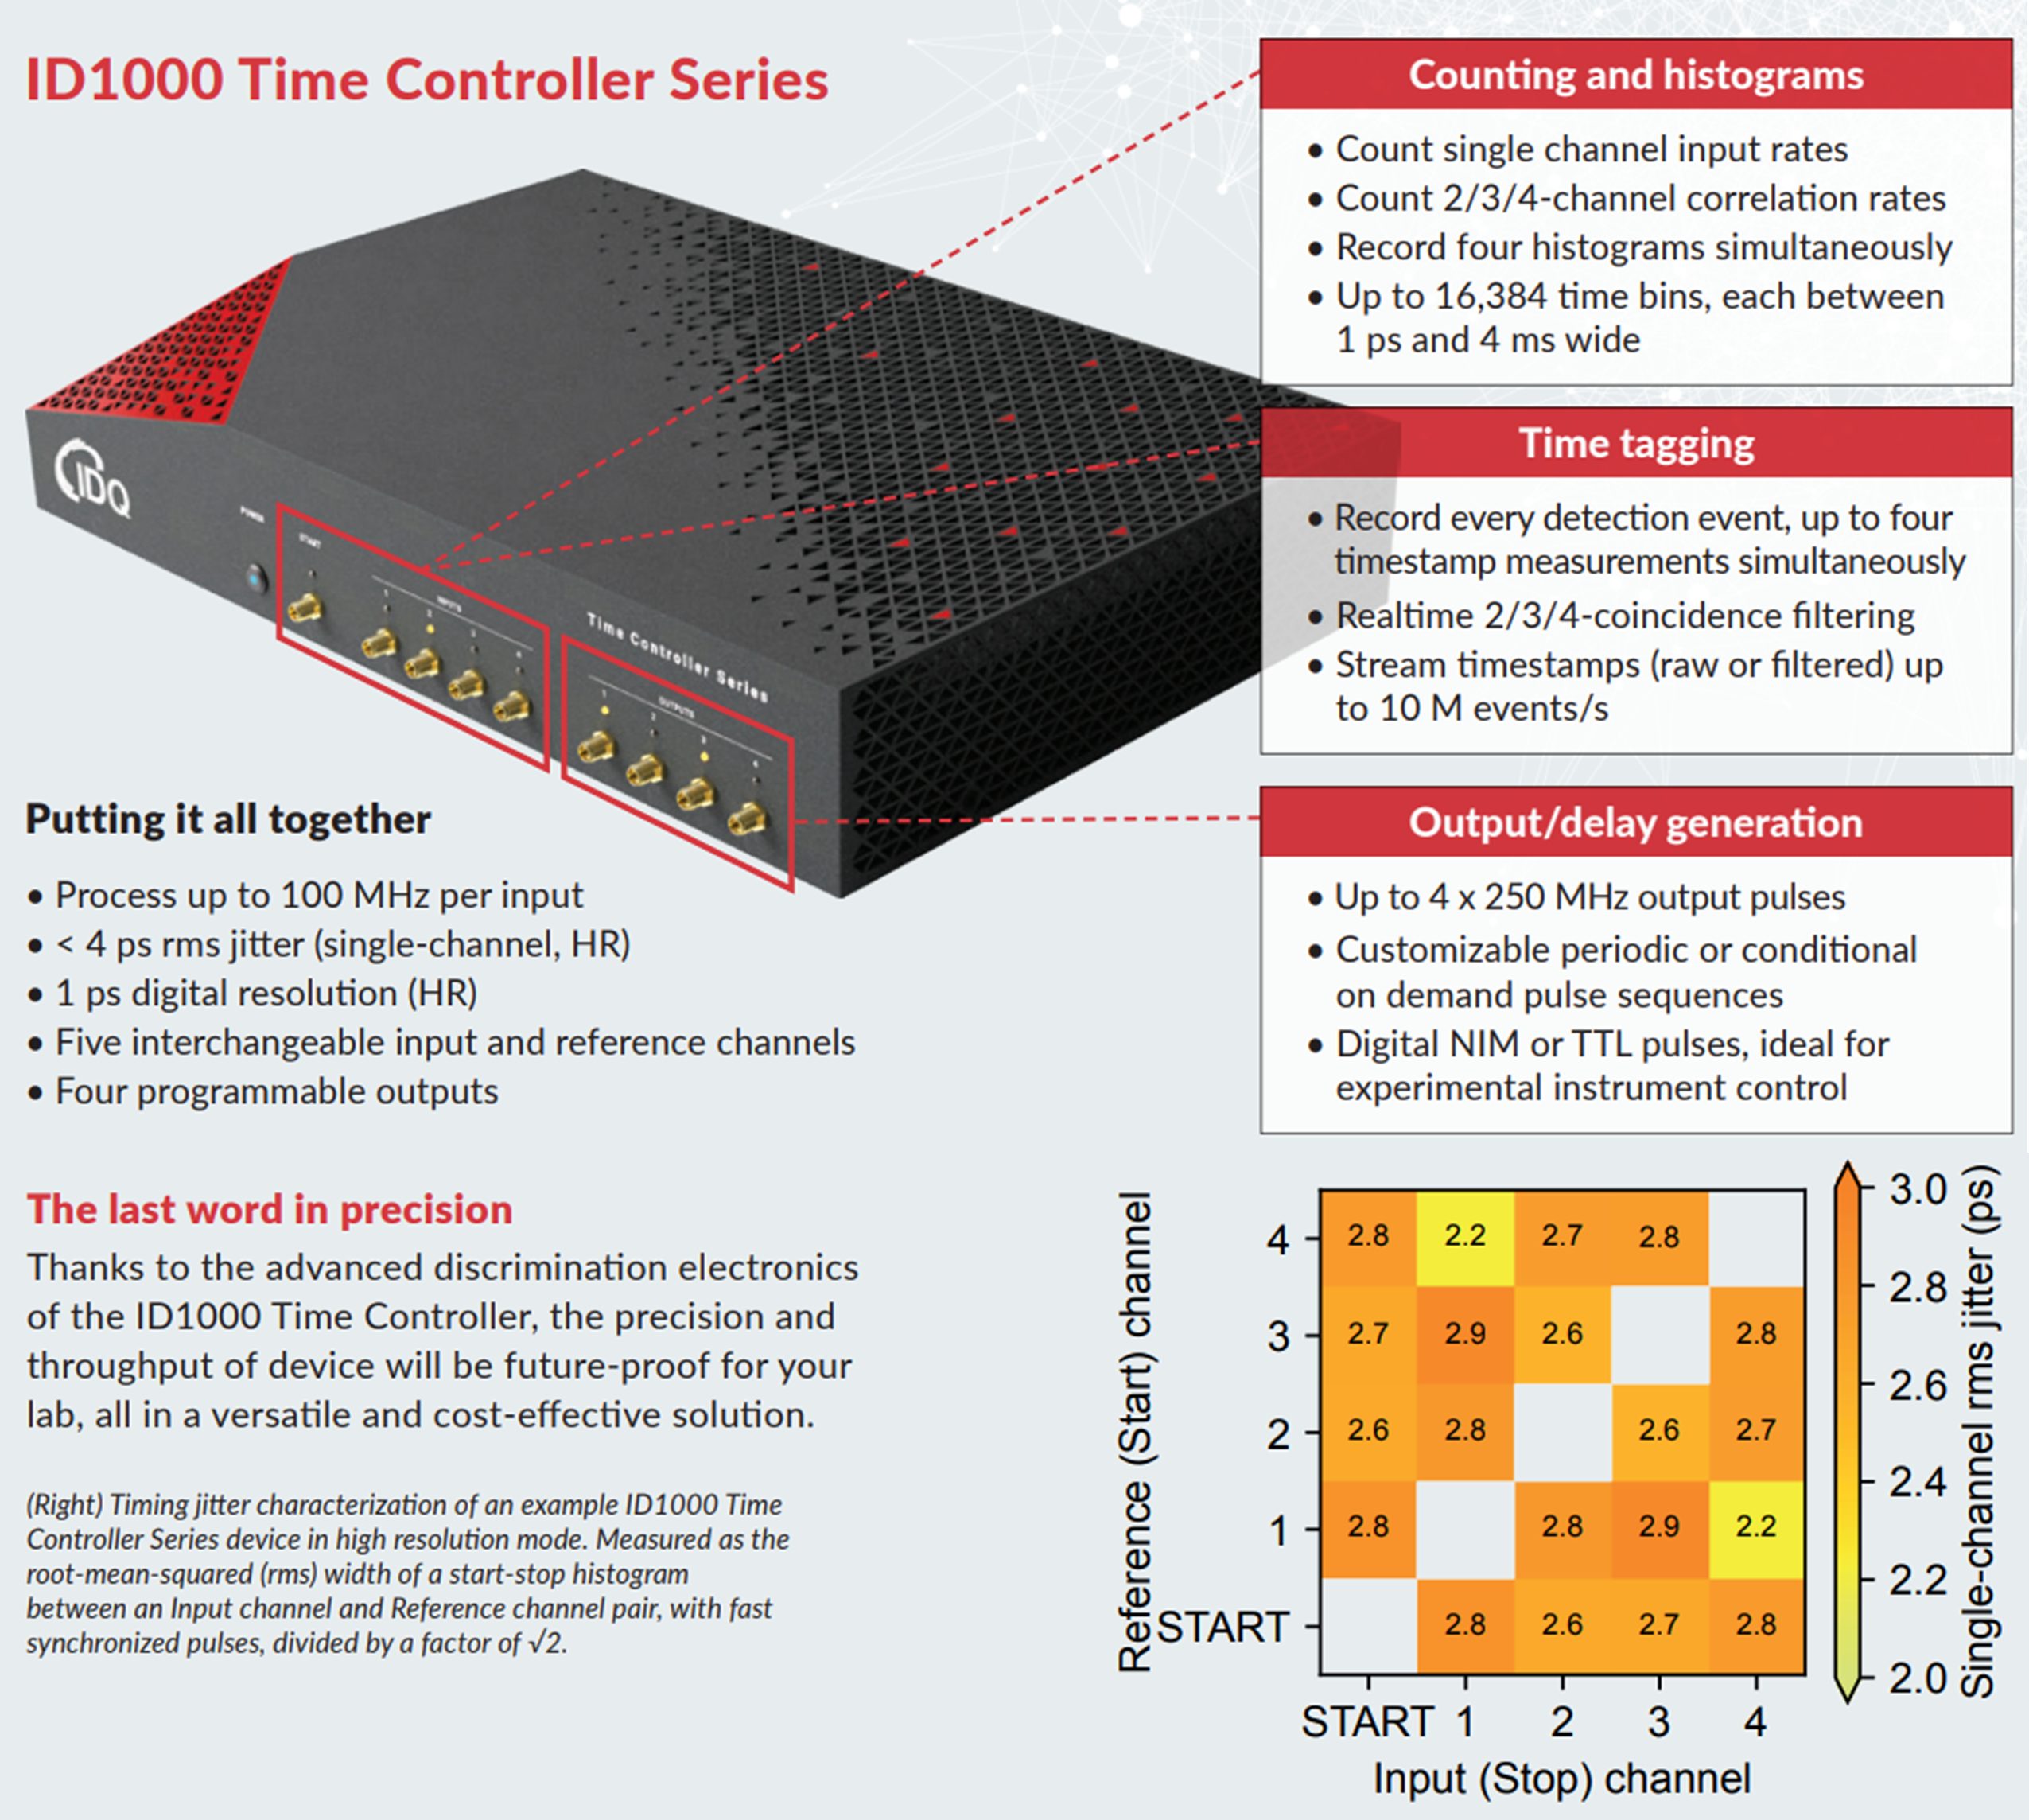 ID1000 Time Controller Series ports